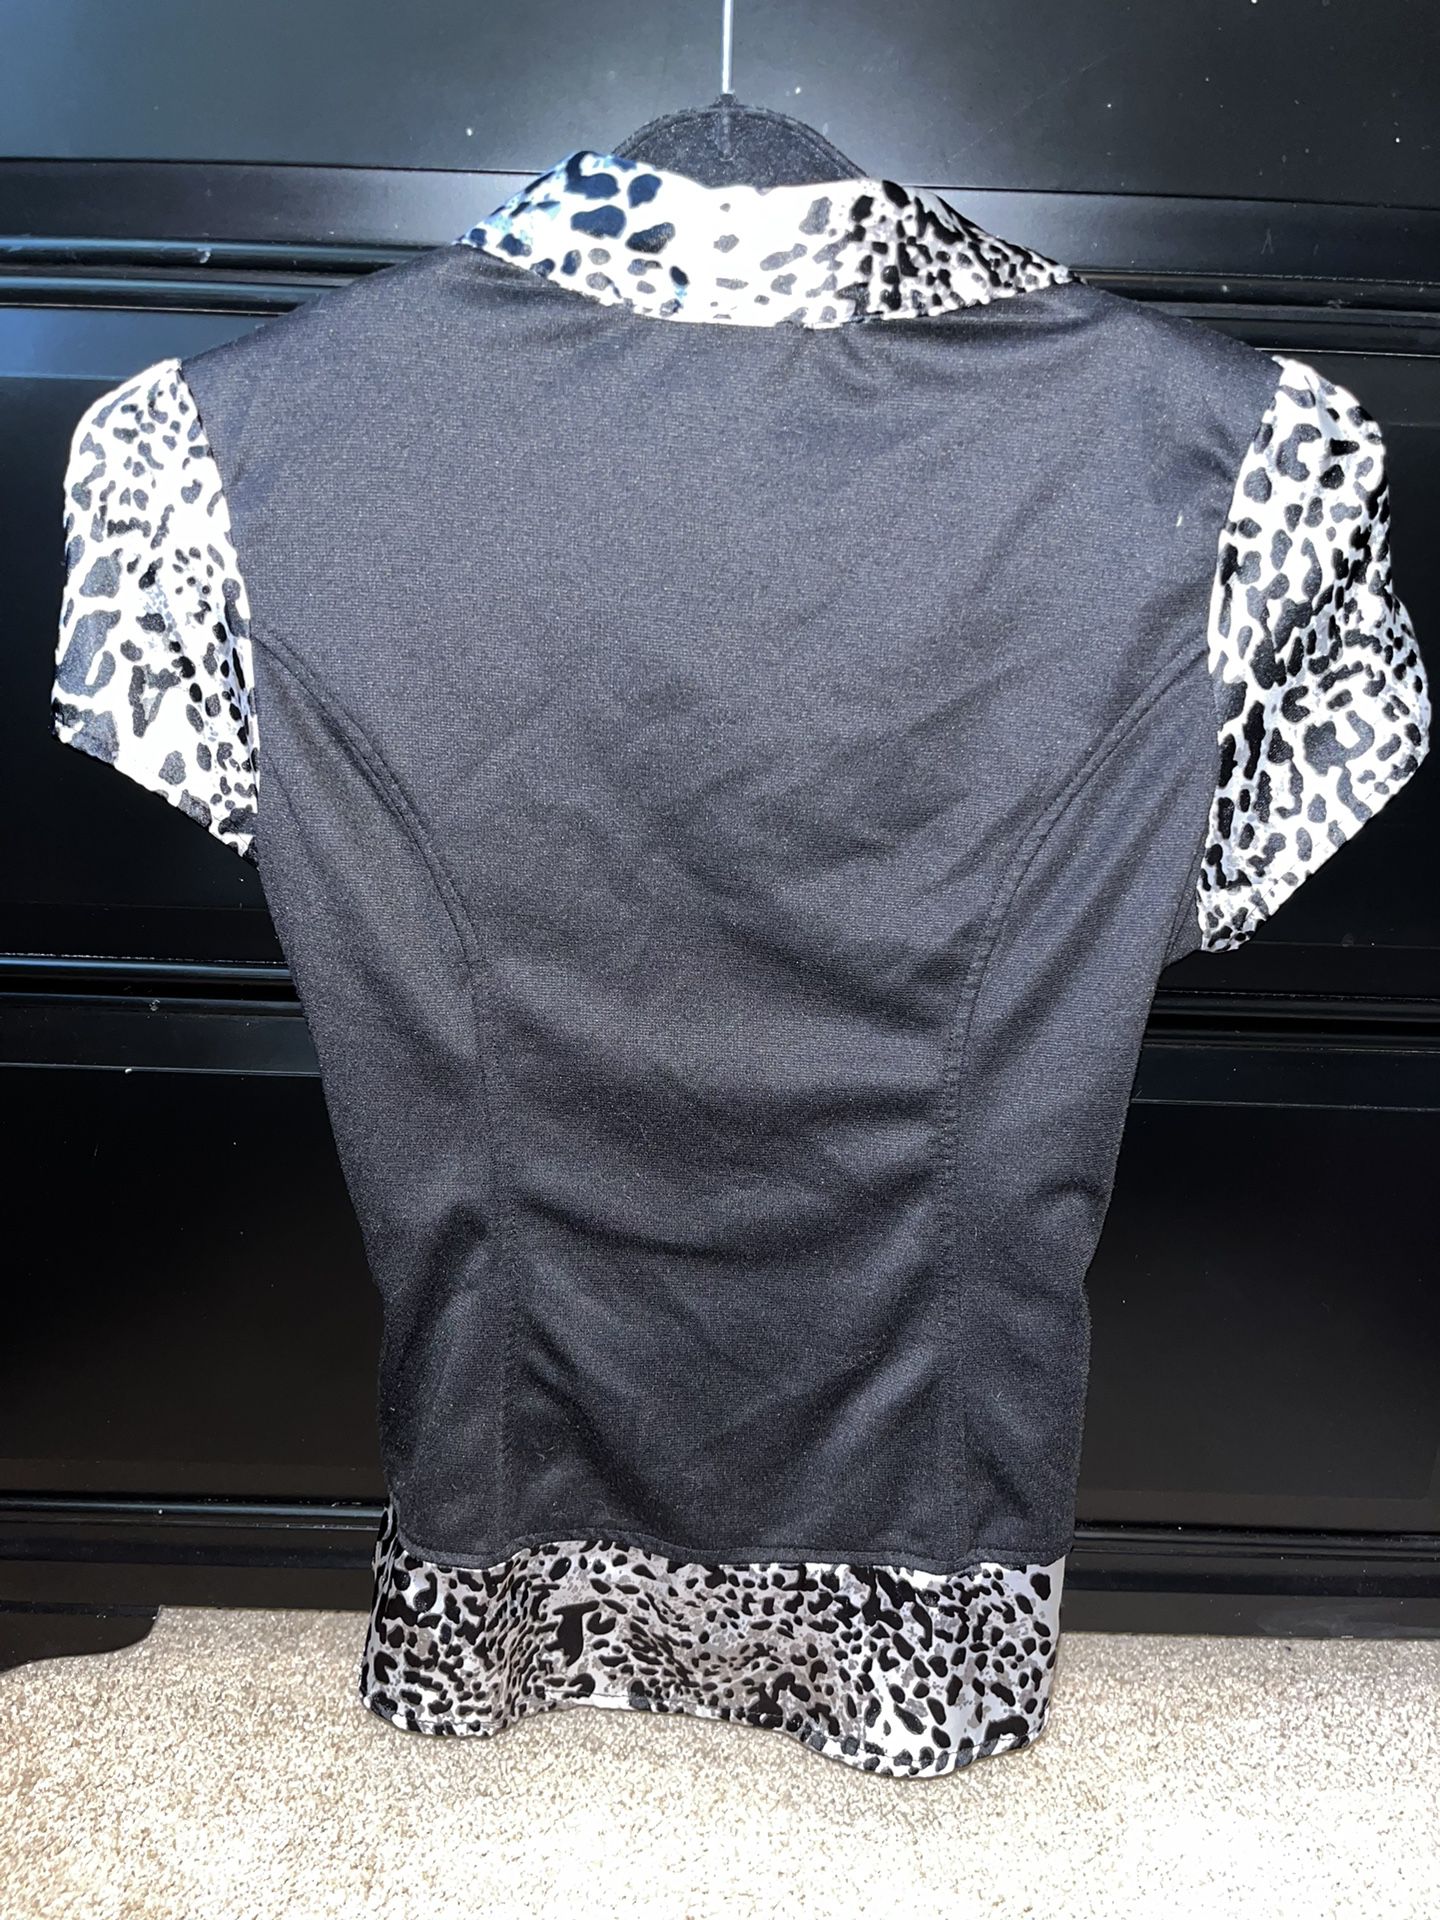 Heart Soul Blouse Black And Silver Business Sweater Vest. 2 Piece Seen Together